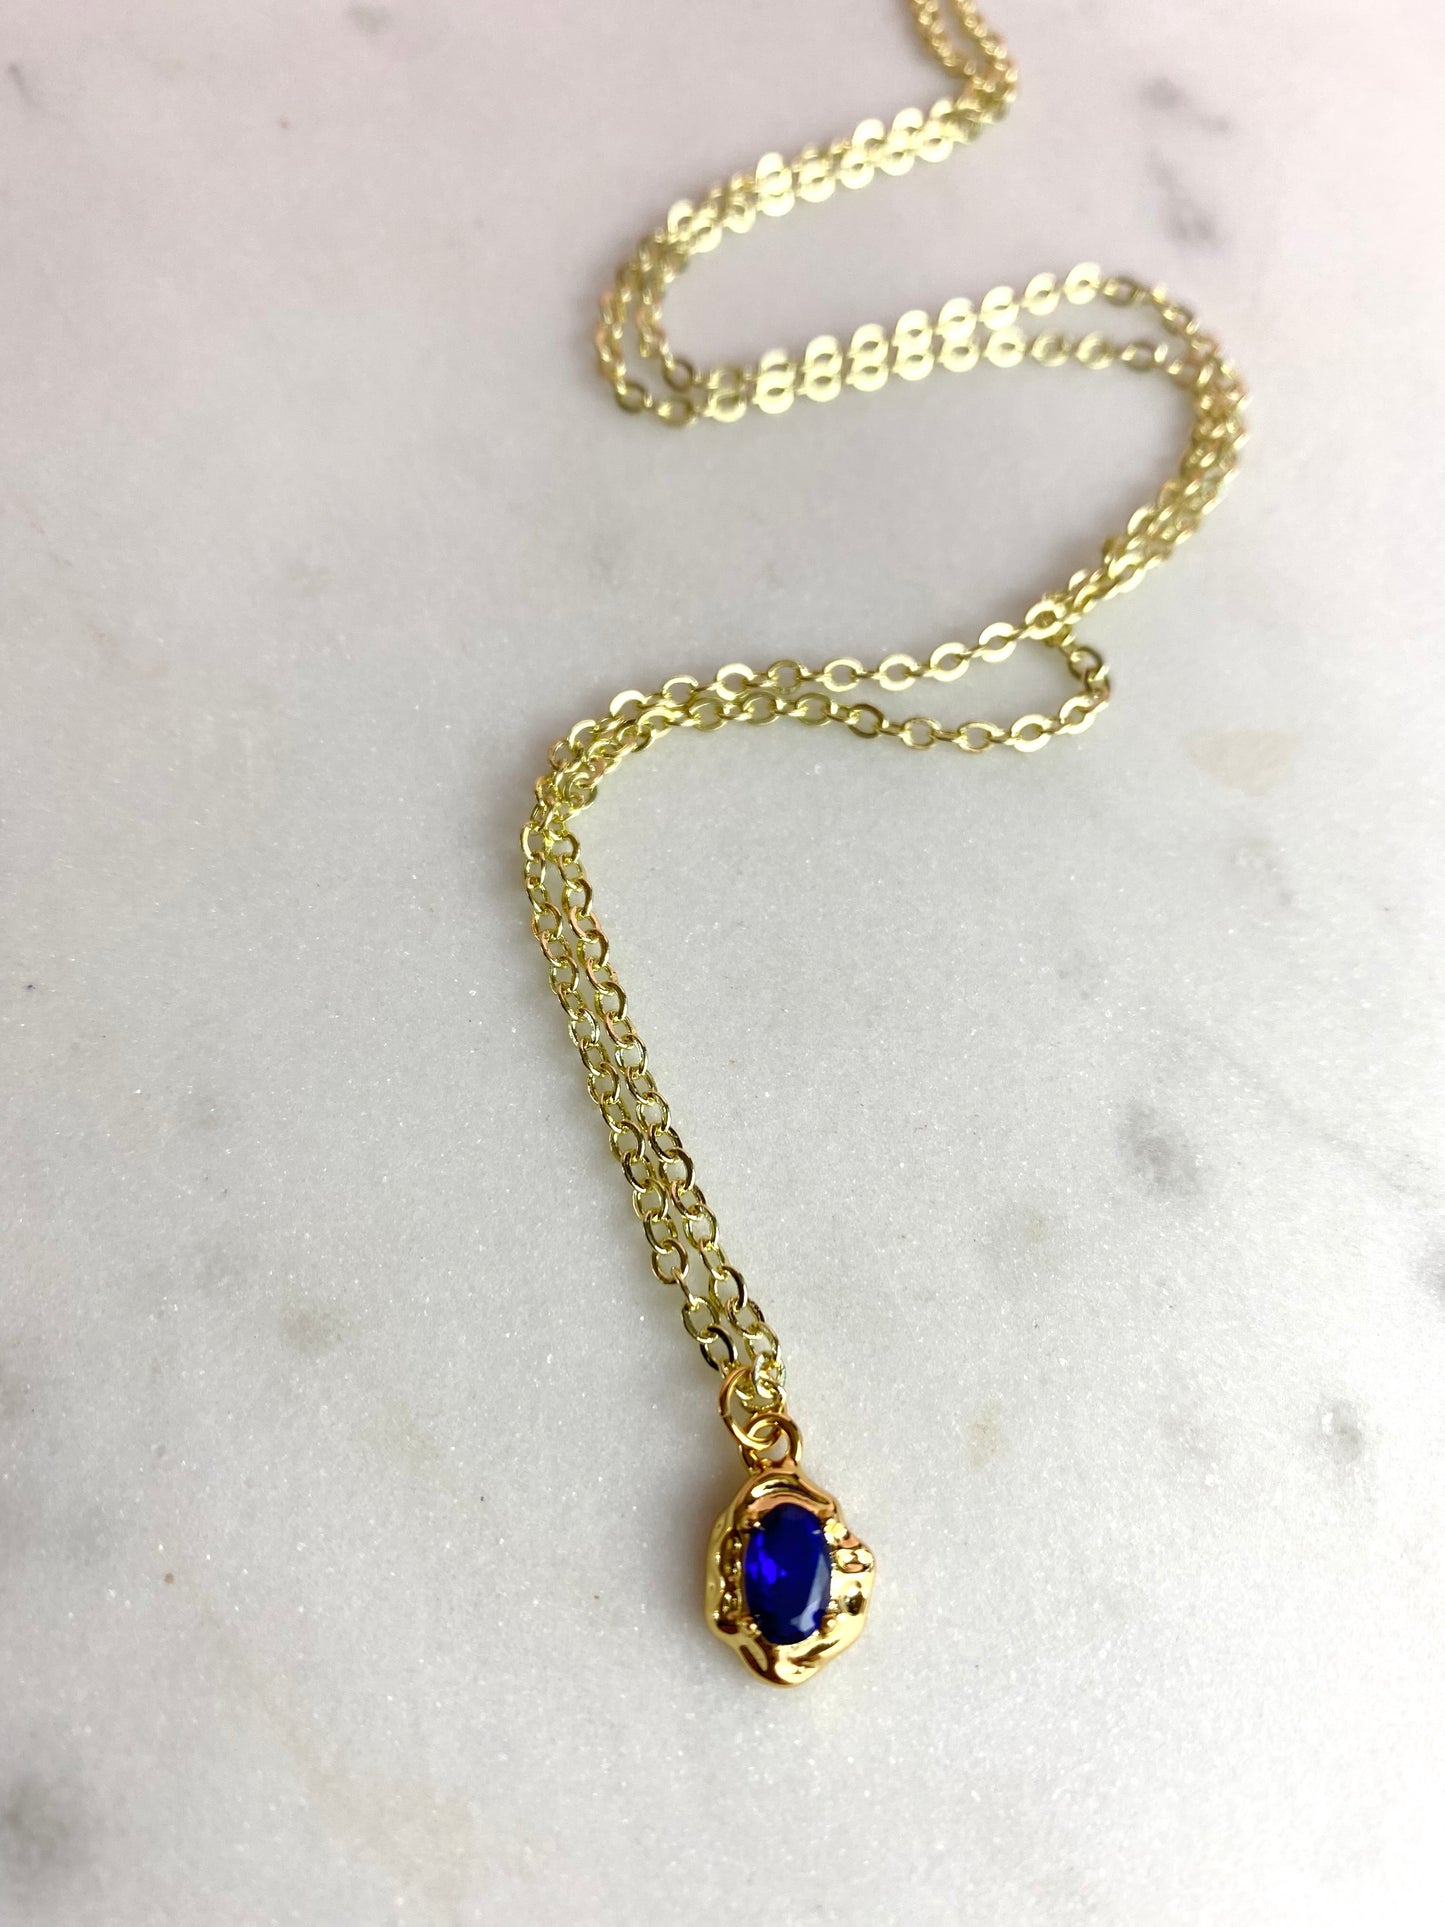 Dainty Gold-Plated Sapphire CZ Oval Necklace | Handmade Jewelry